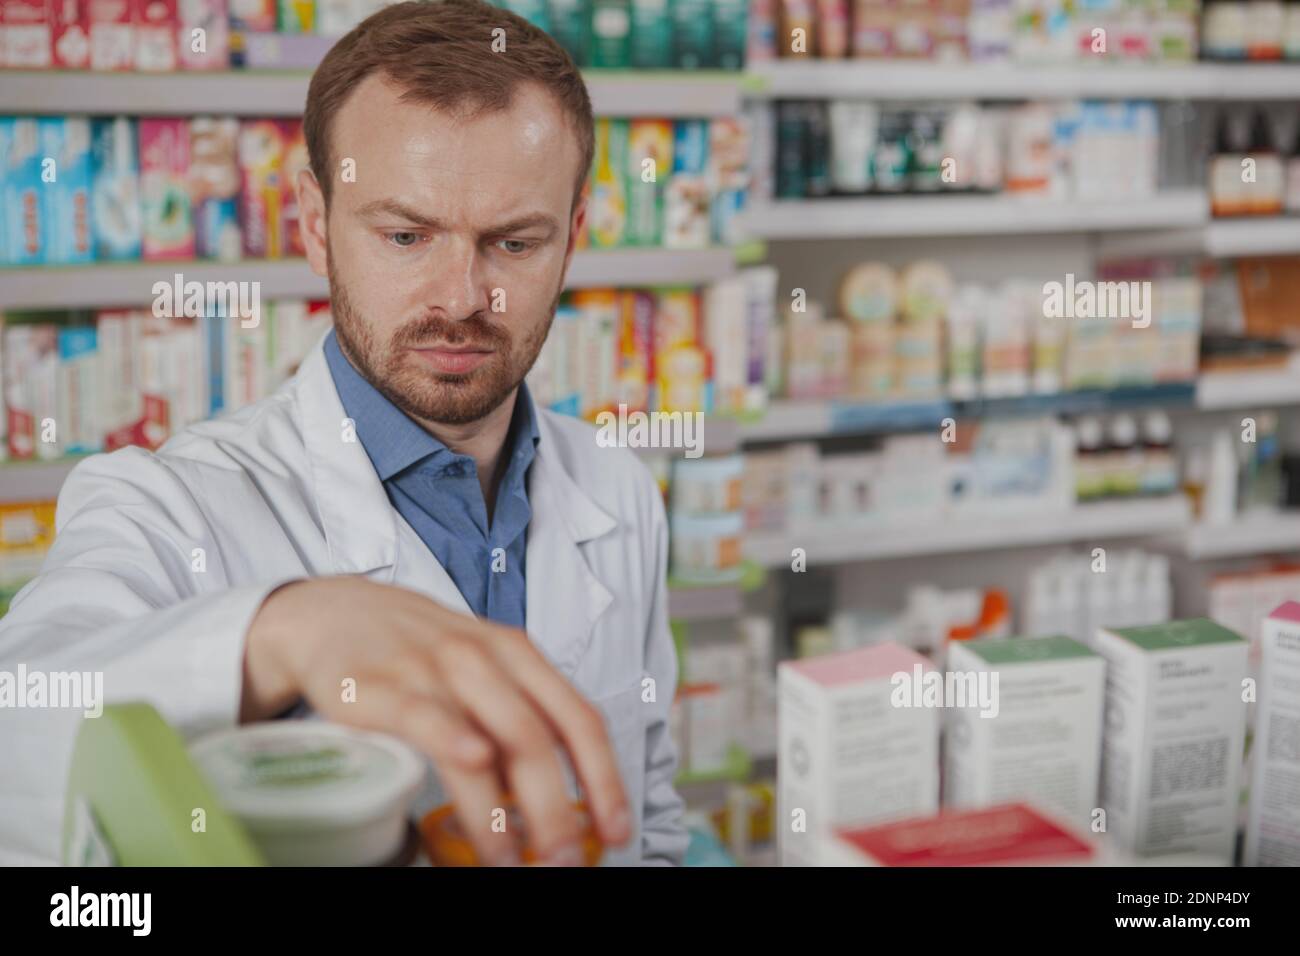 Close up of a mature male pharmacist looking concentrated, organizing medical products on shelves, copy space Stock Photo